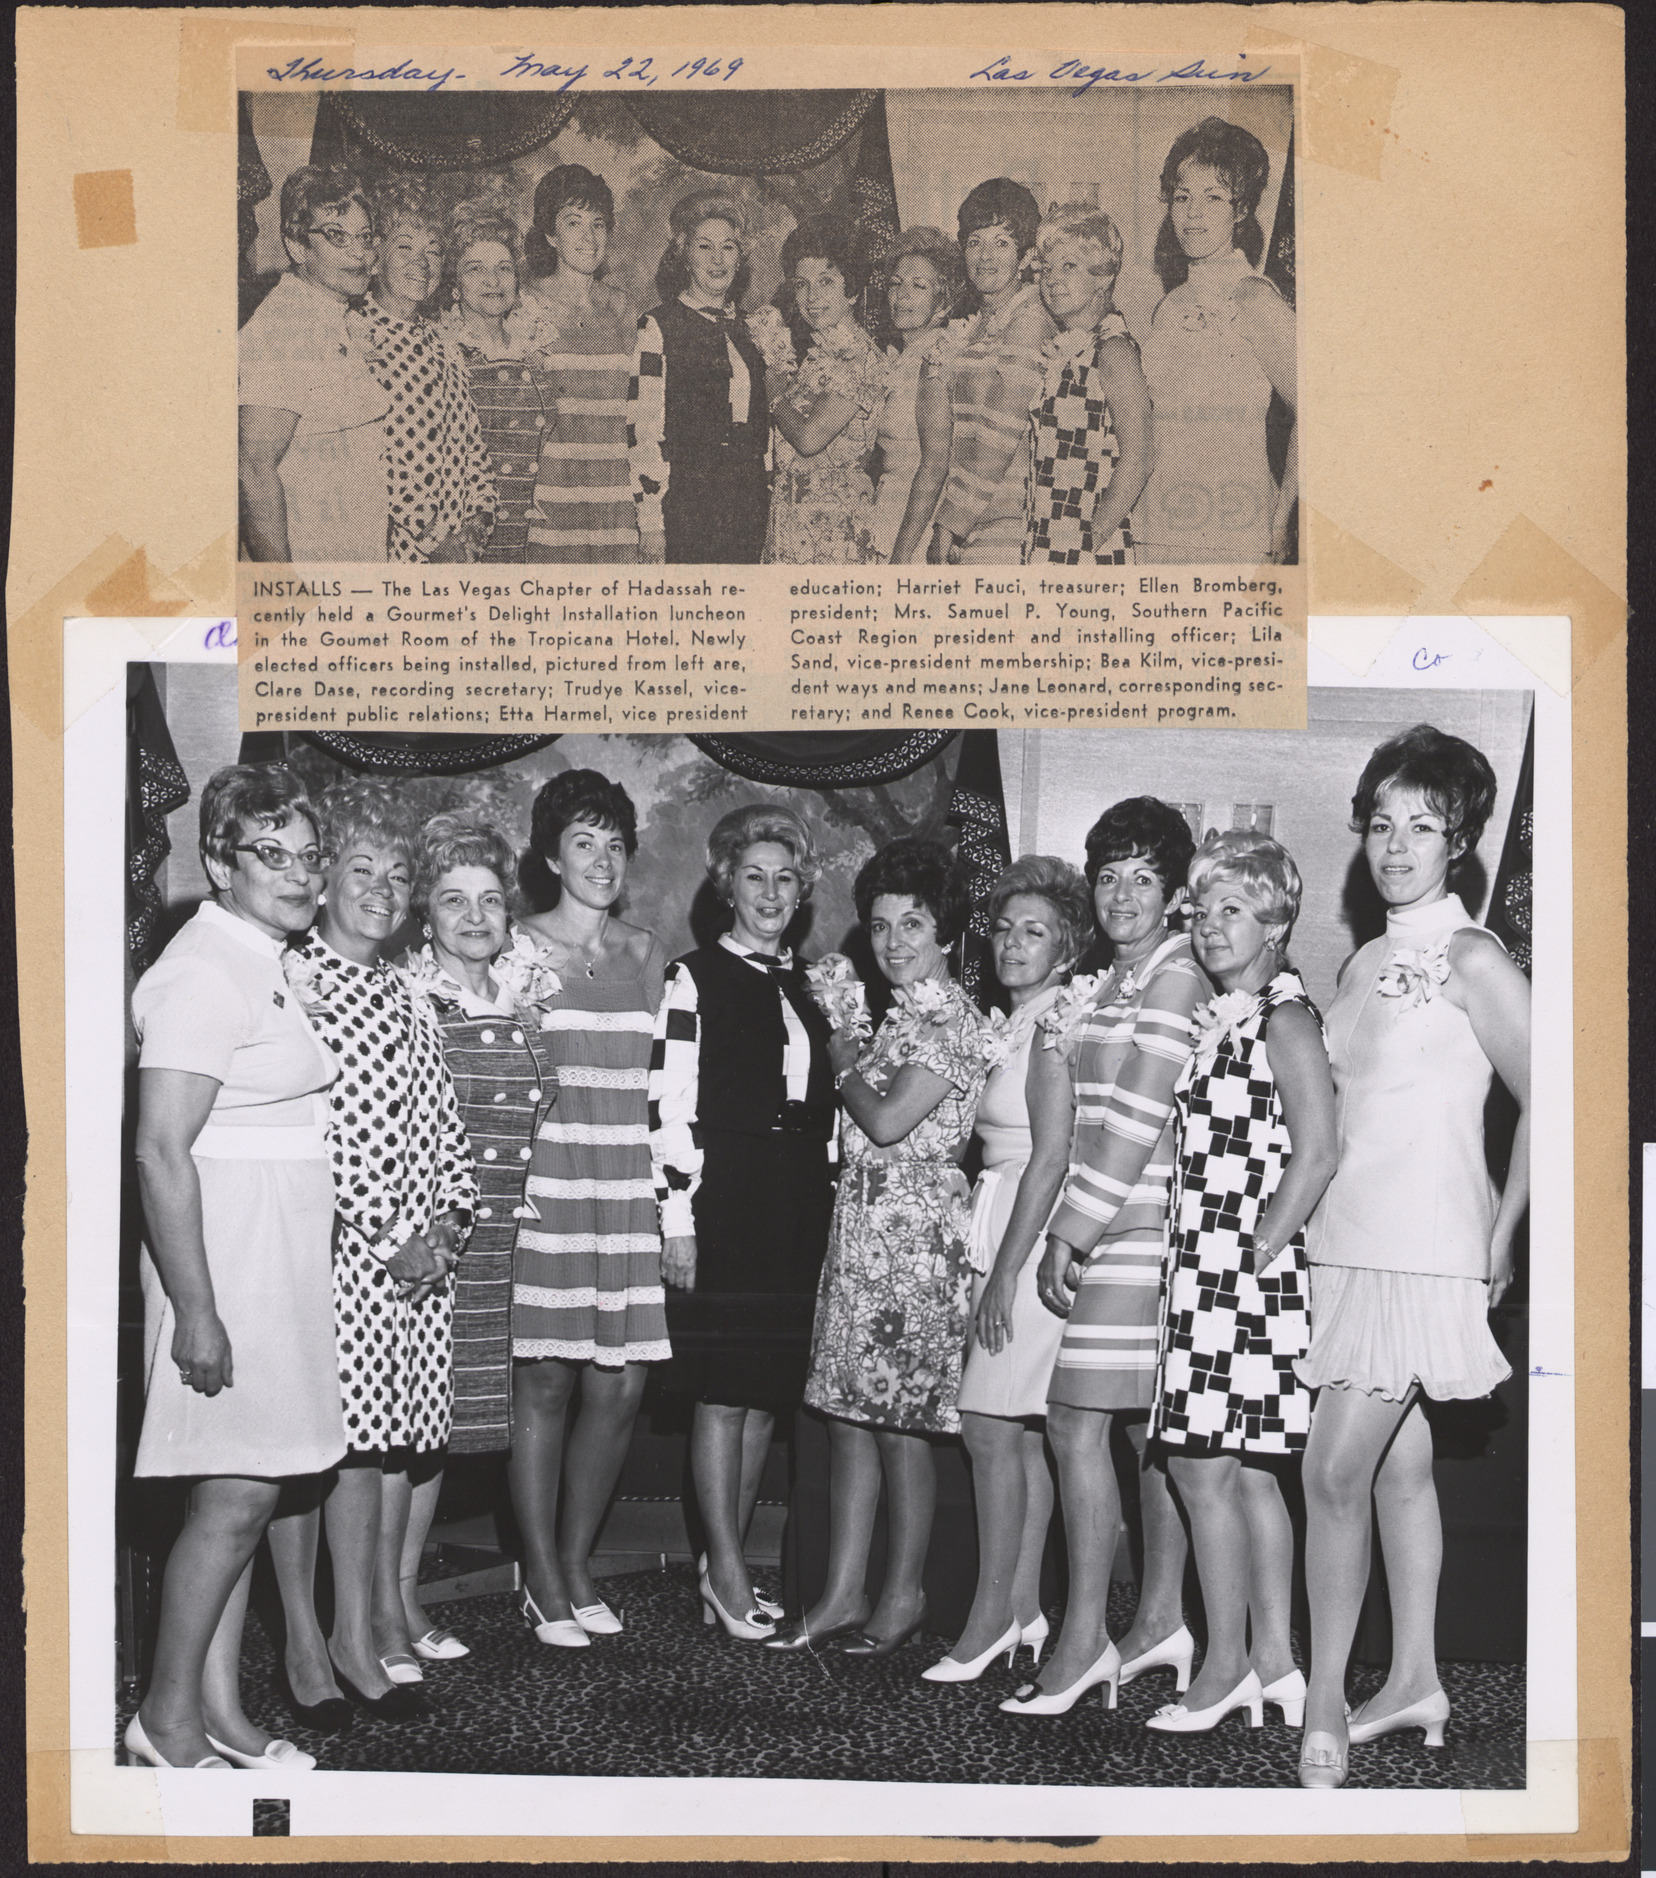 Newspaper clipping, Installs, Las Vegas Sun, May 22, 1969, and photograph of group of women from Las Vegas Chapter of Hadassah